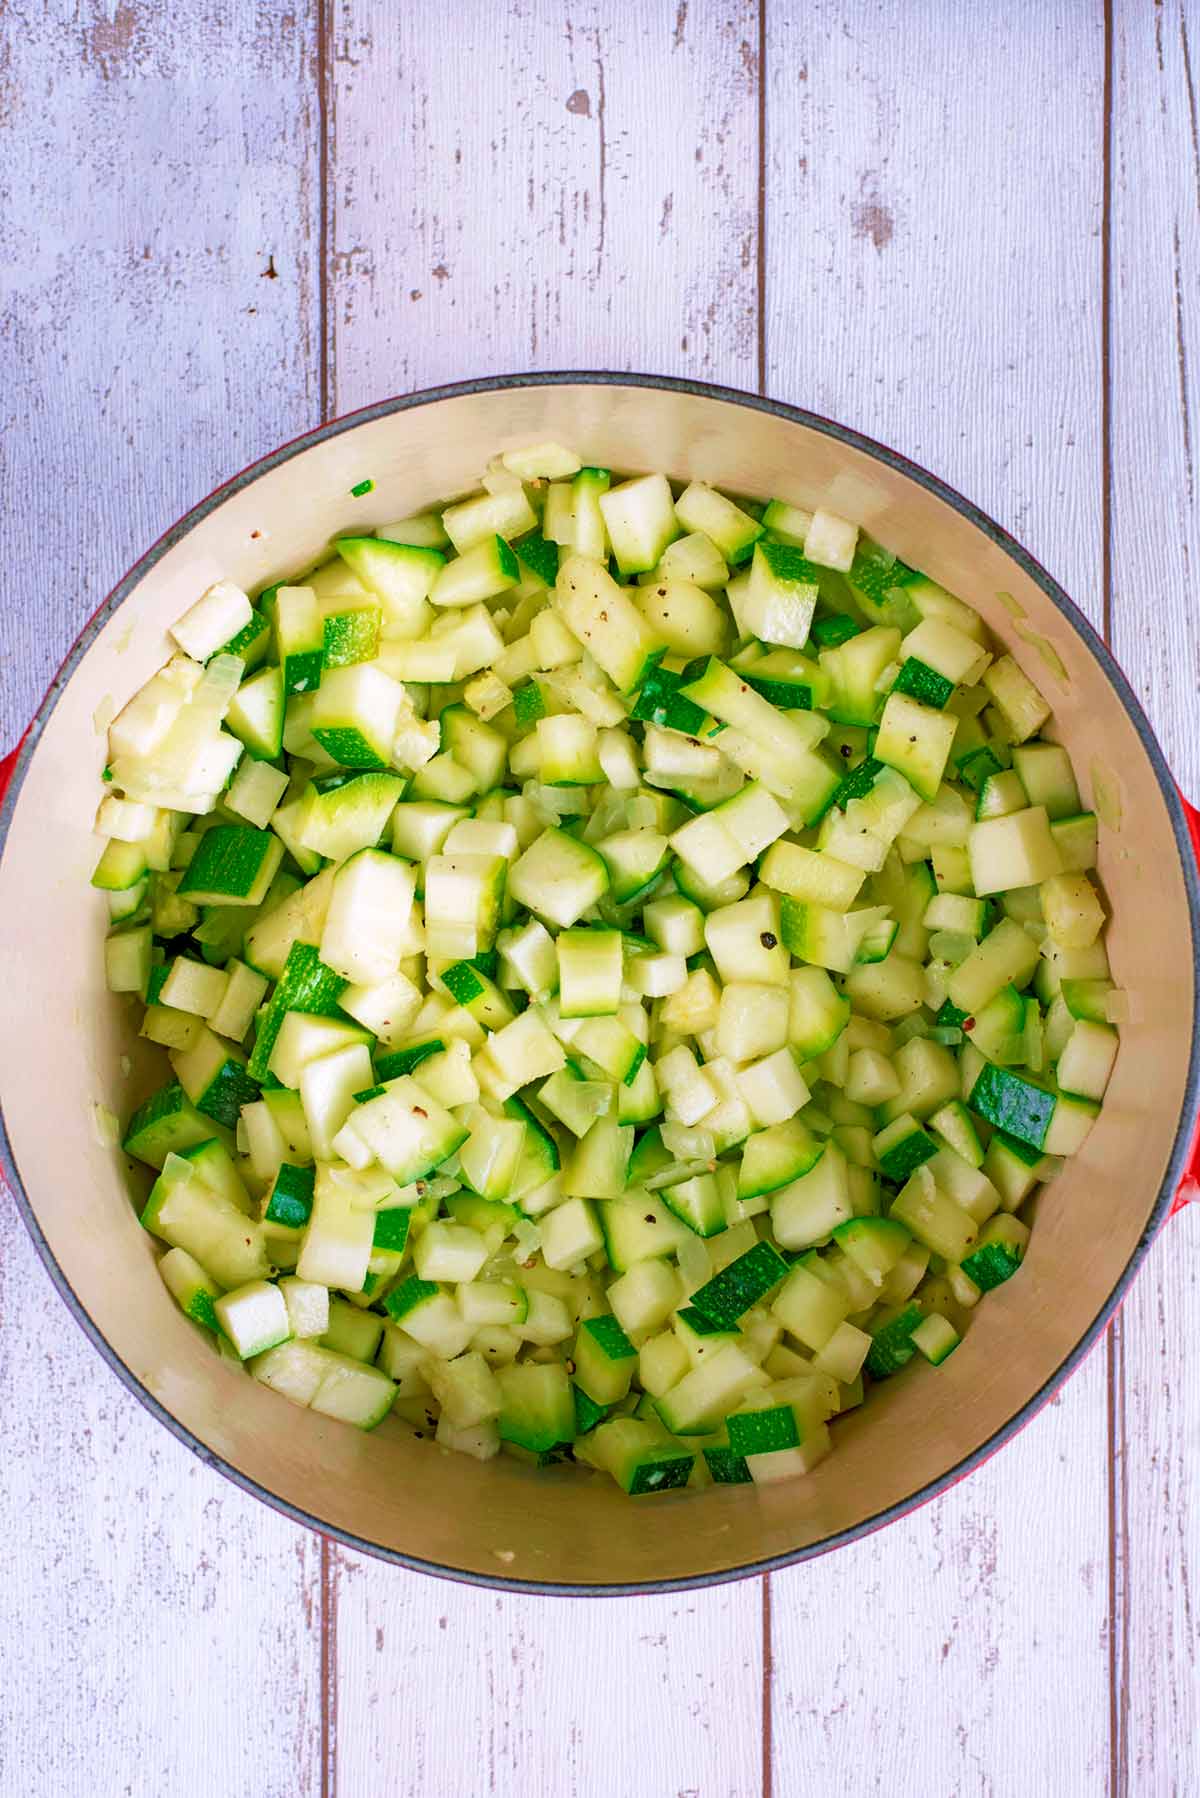 Chopped courgette and onions in a large pan.